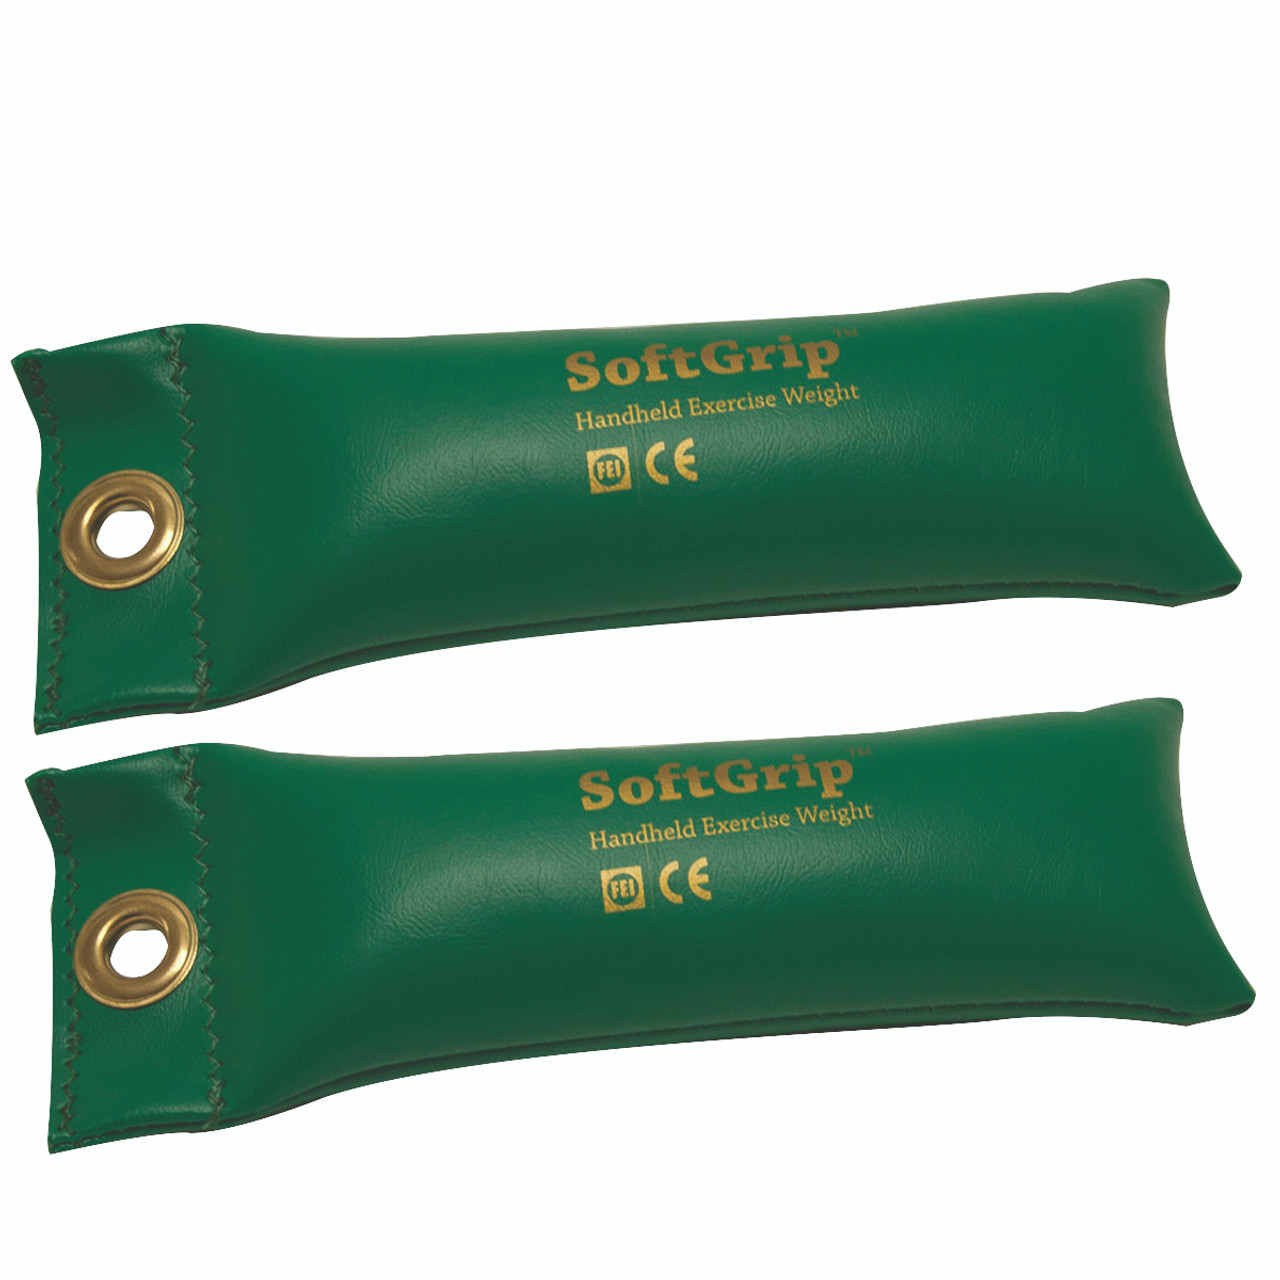 CanDo¨ SoftGrip¨ Hand Weight - 2 lb - Green - pair